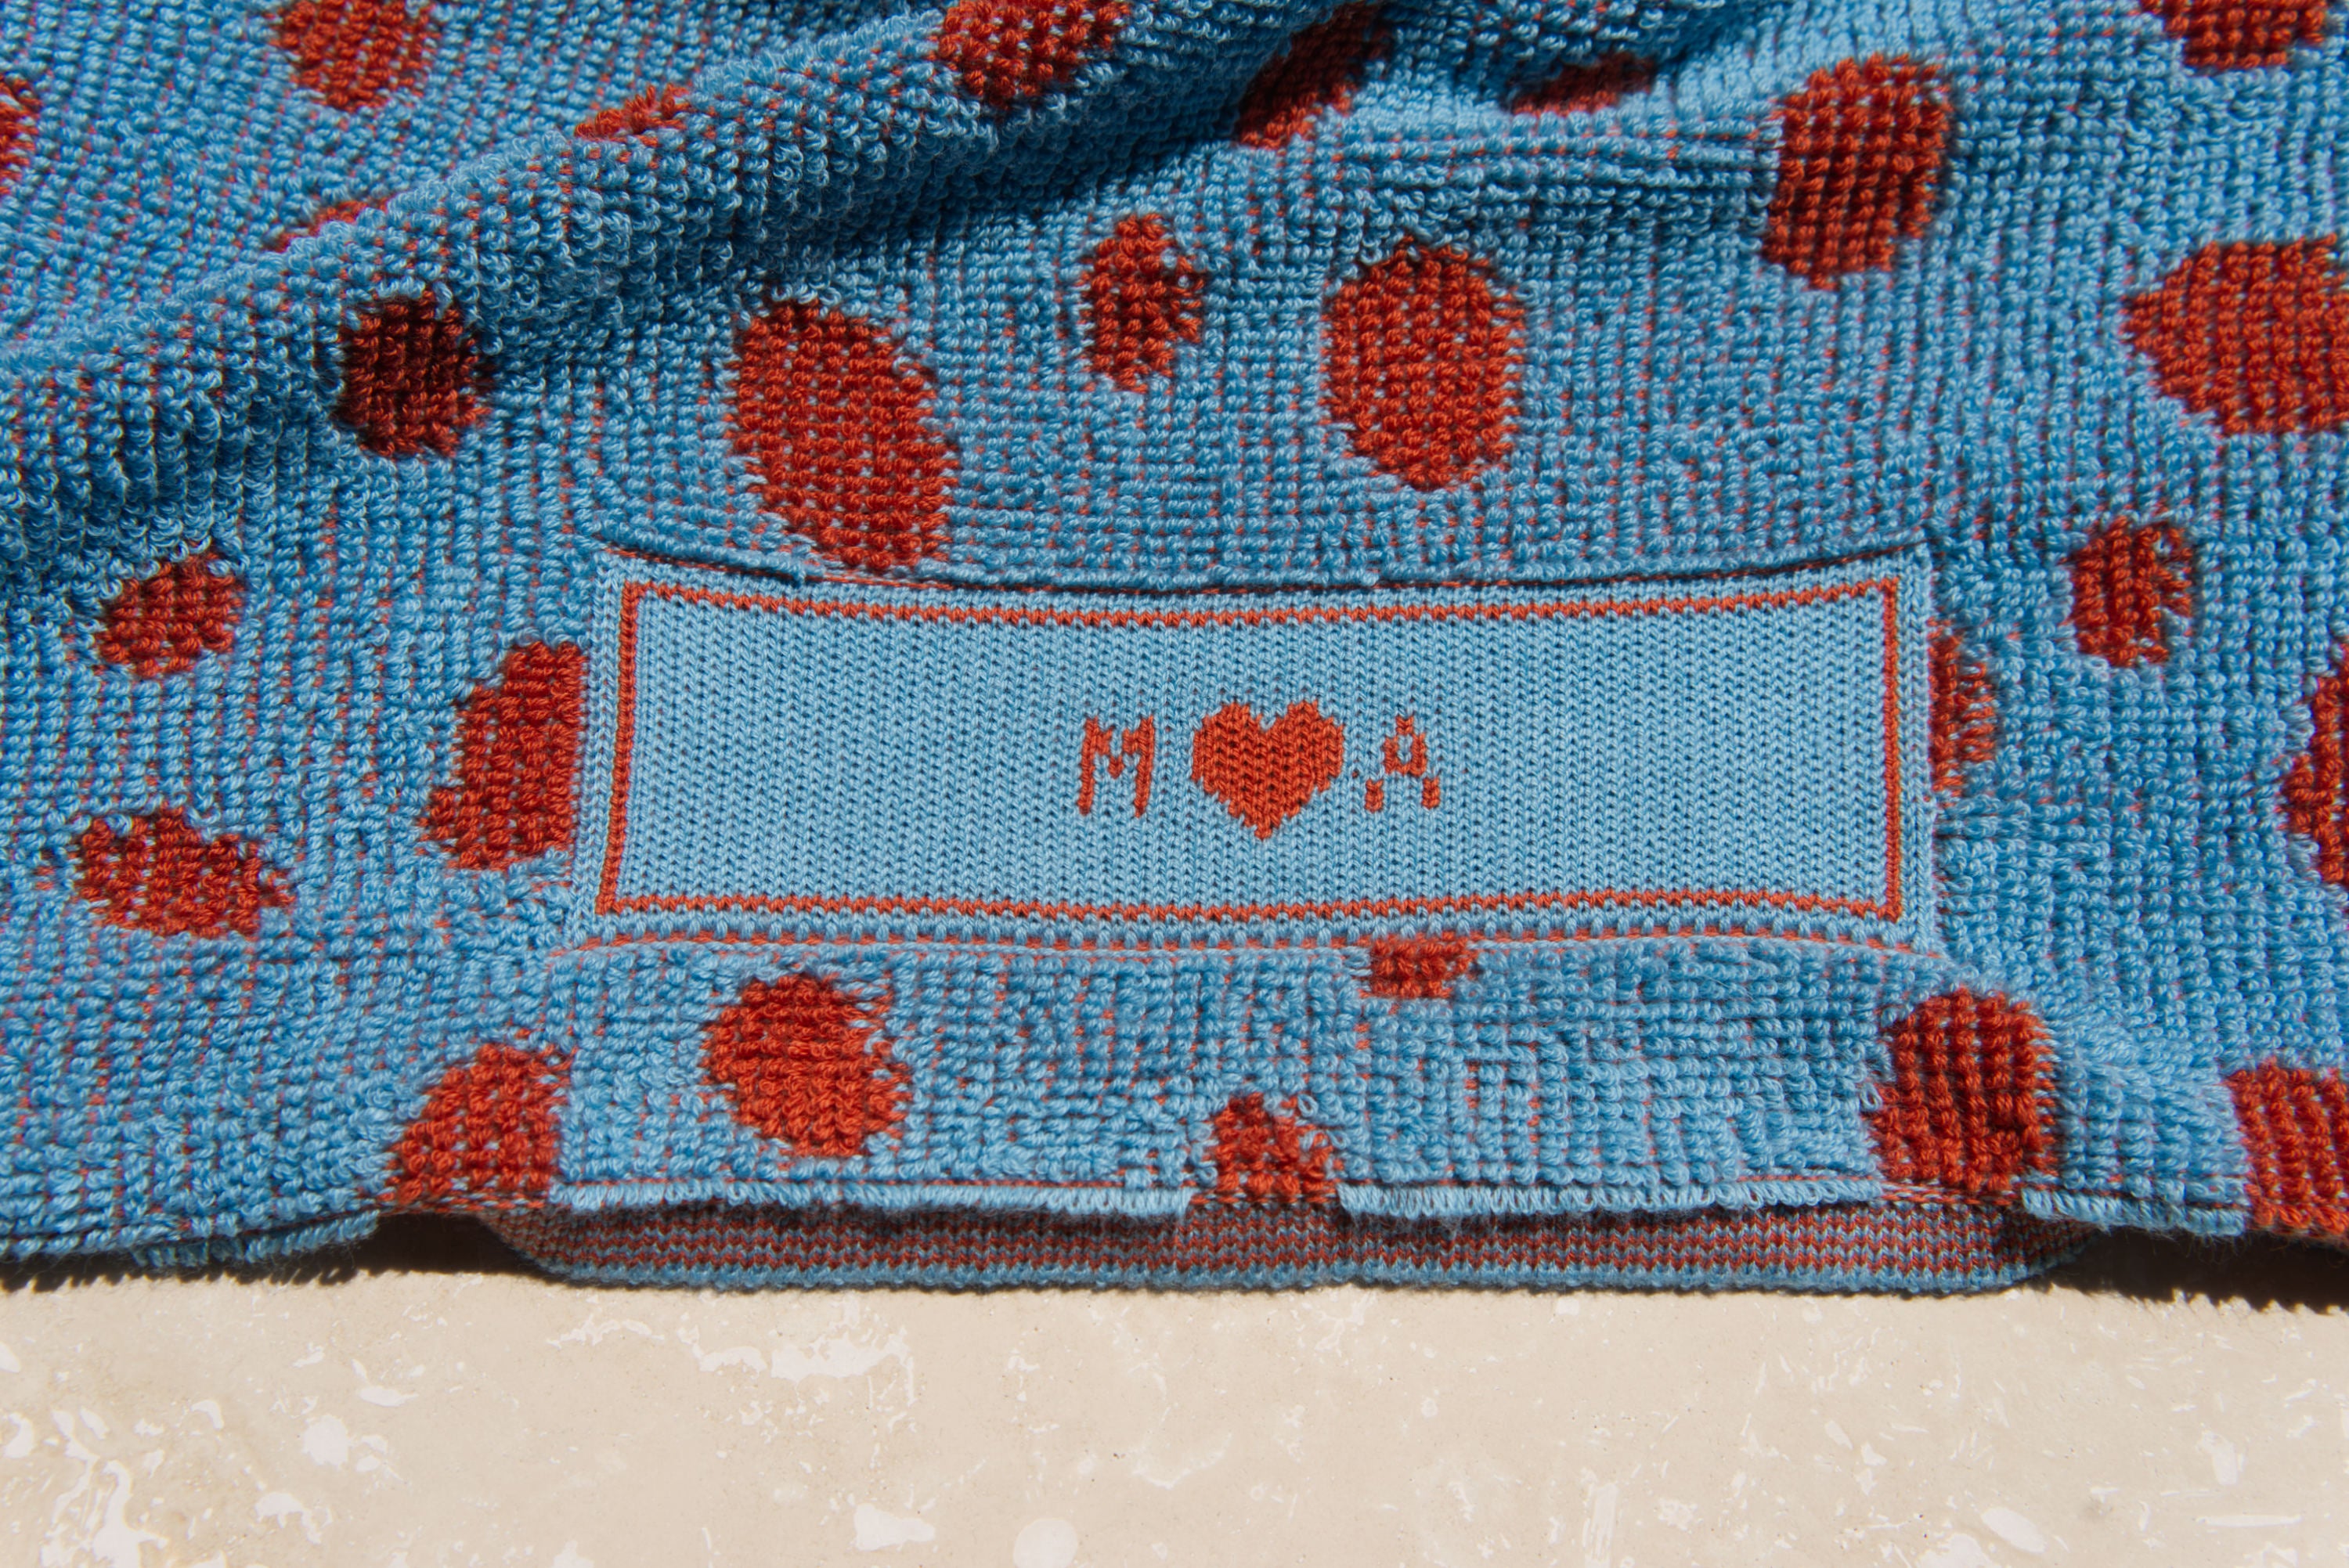 Embroidered versus knitted personalised towels